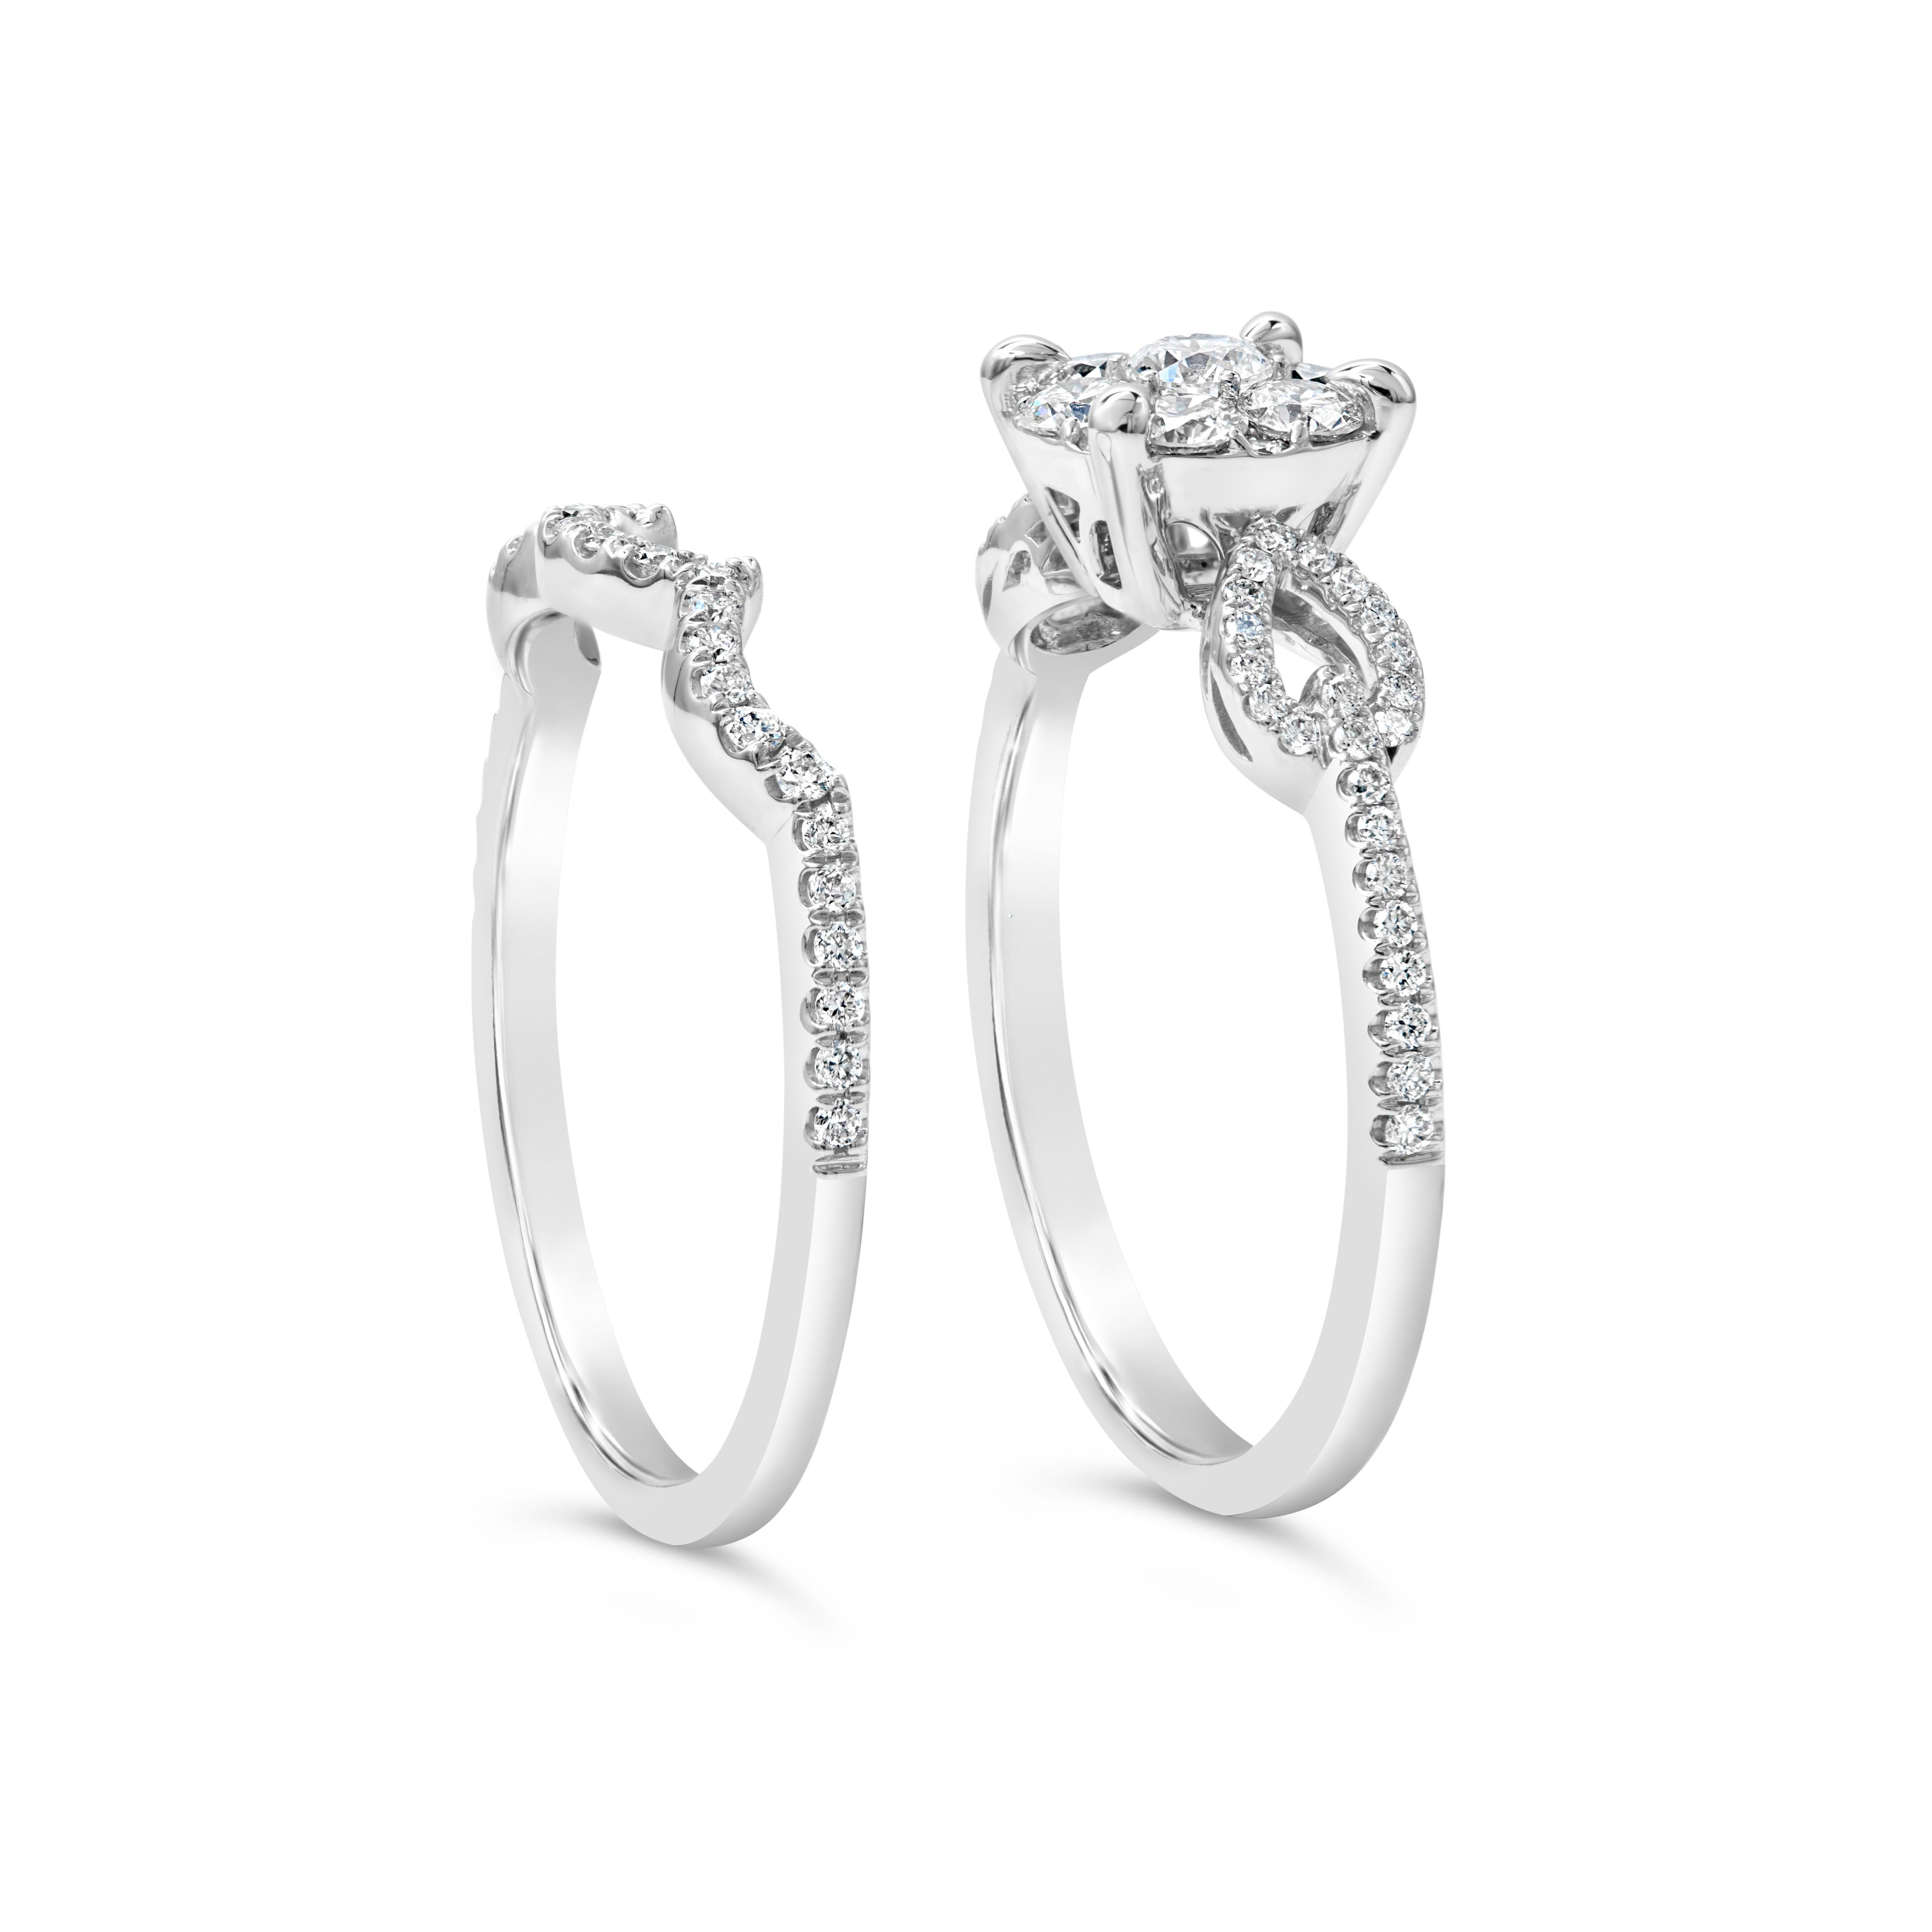 The engagement ring features a cluster of round brilliant diamonds, set in a brilliant diamond halo in a unique 14k white gold mounting. Diamonds weigh 0.56 carats total.The wedding band features a curved style set with diamonds for a seamless fit